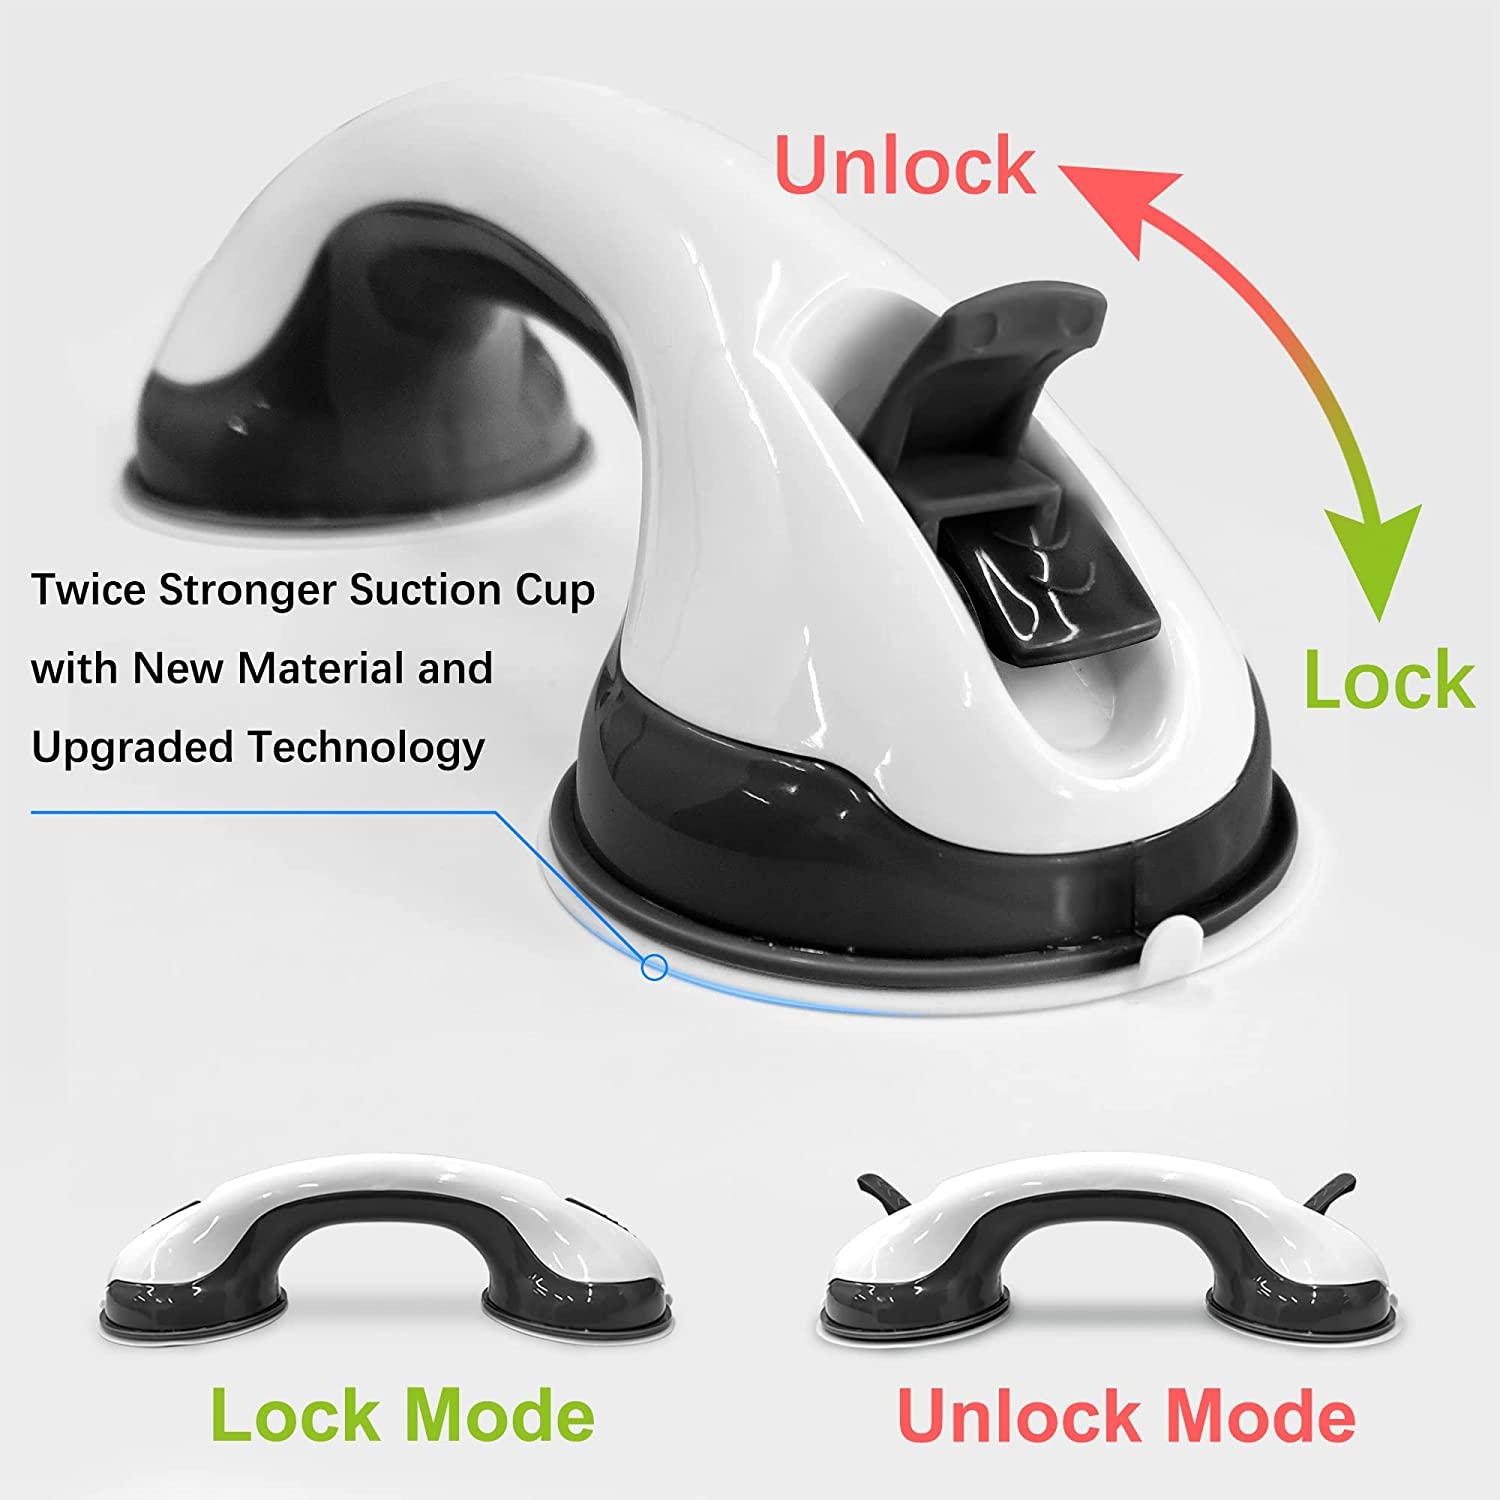 Able Lift™ 2 Pack Suction Balance Assist Bathroom Shower Handle